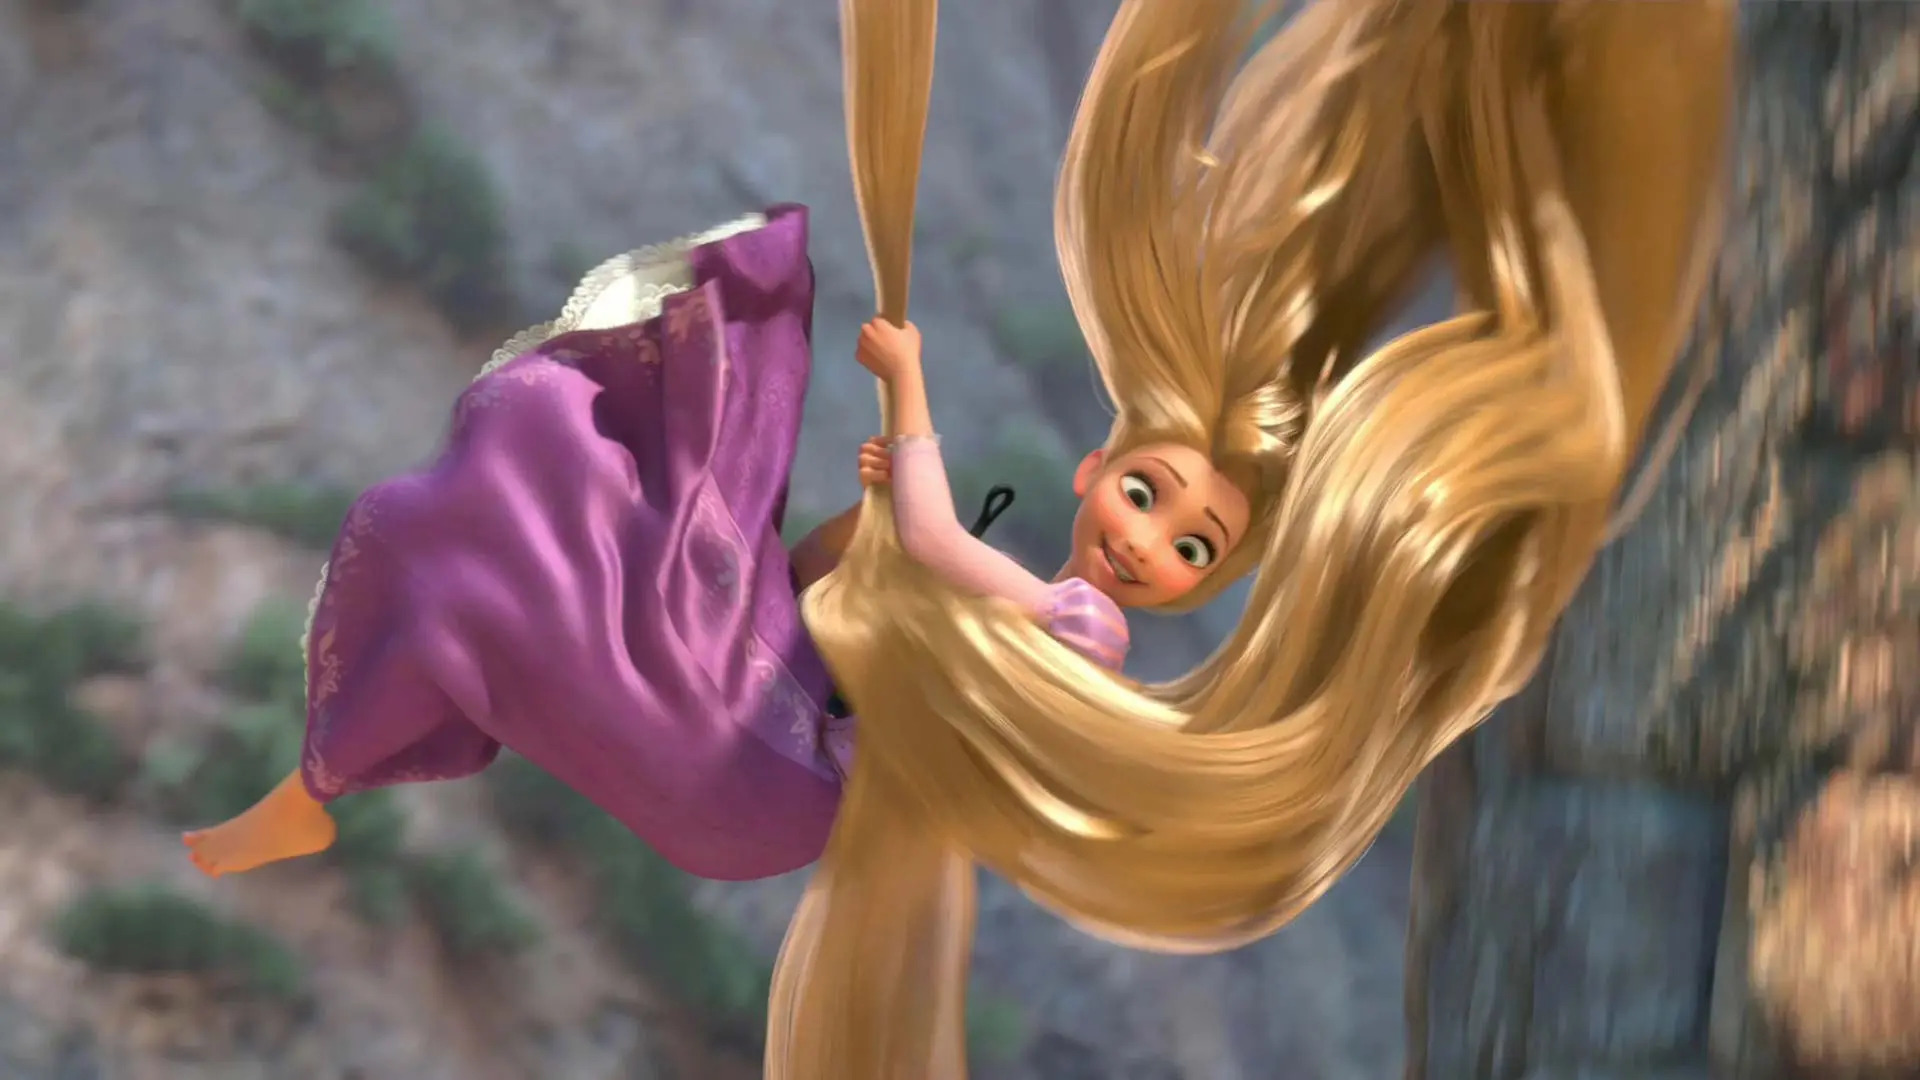 tangled-young-girl-blonde-swaying-with-her-hair_14_11zon